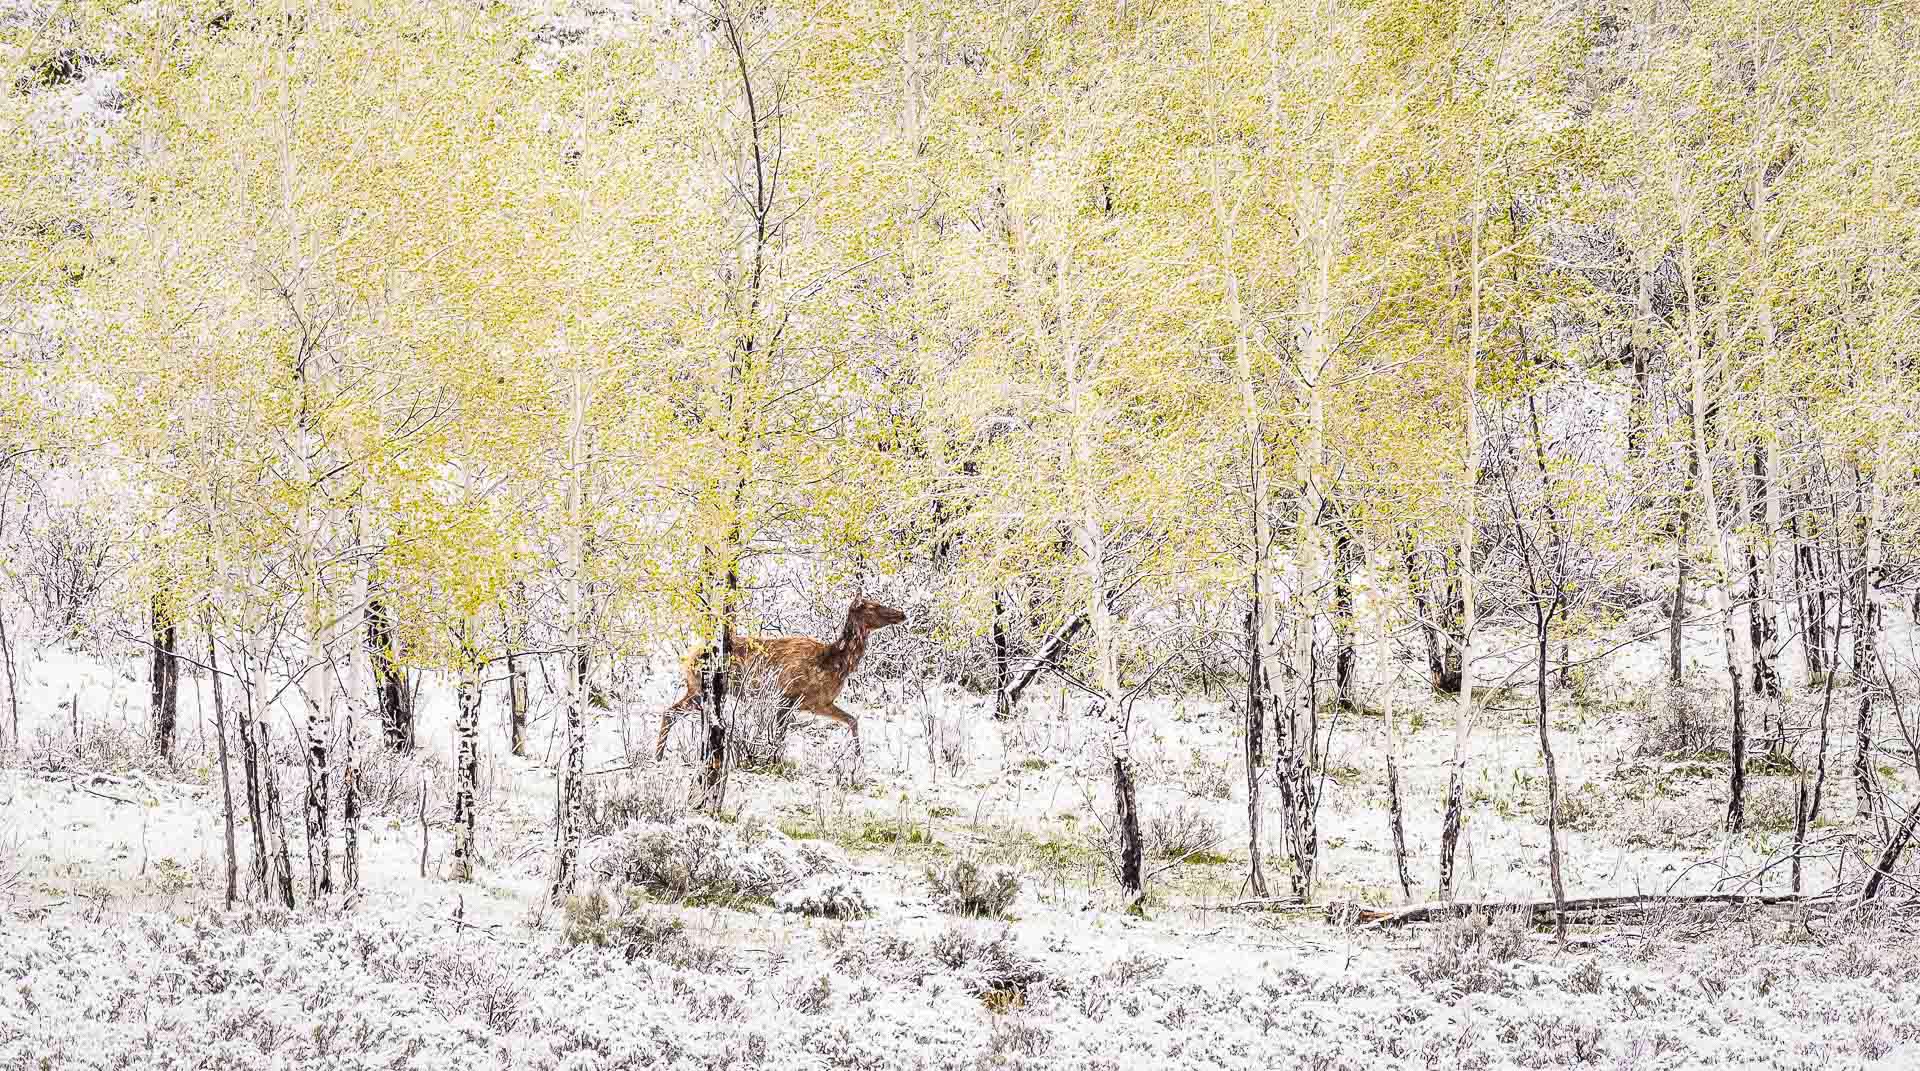 A Single Elk Walks In The Snow Contrasted Brightly Colored Spring Aspens, A Unique Photograph Captured By Dwight Vasel, Framed And Available At Gallery Wild